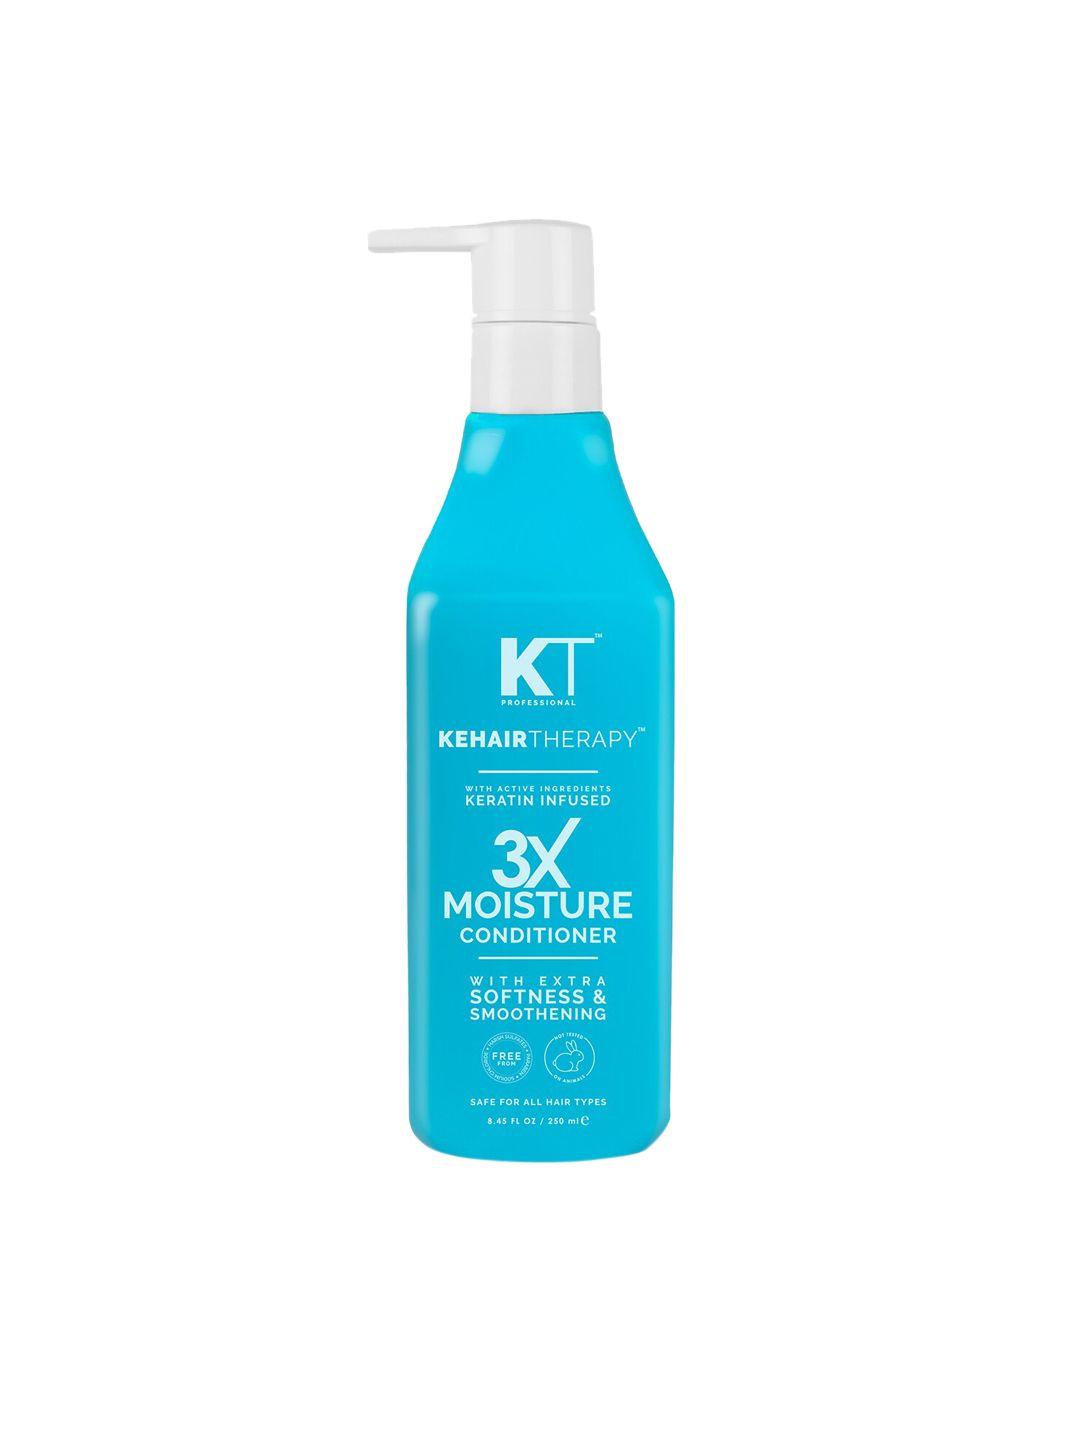 kehairtherapy kt professional sulfate-free 3x moisture conditioner